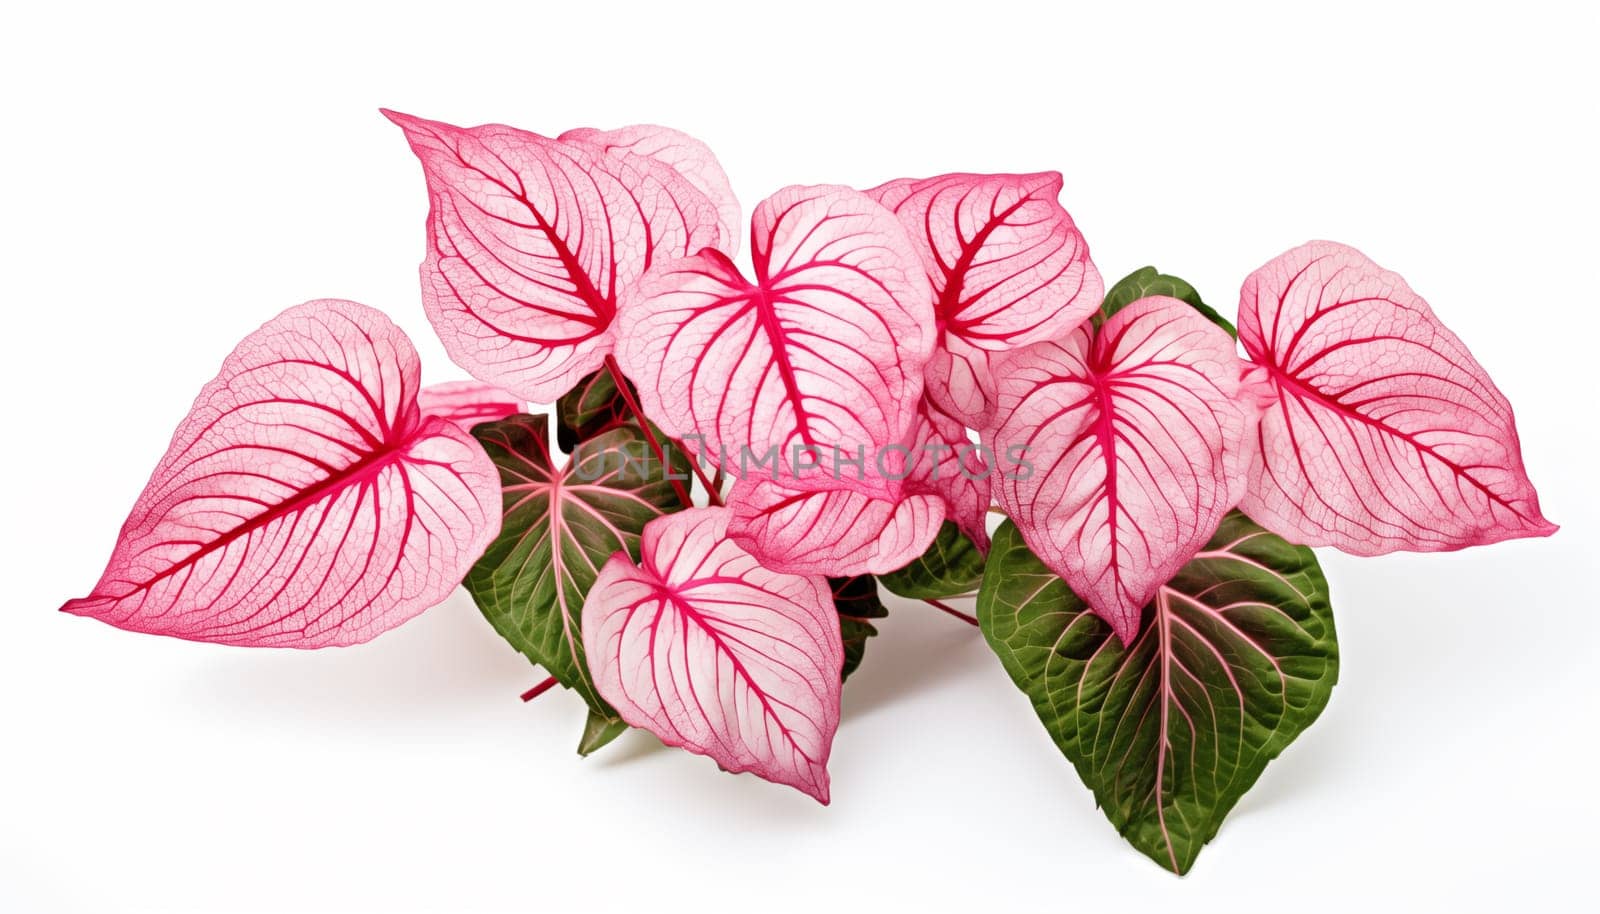 Caladiums patterned leaves on white background. High quality photo